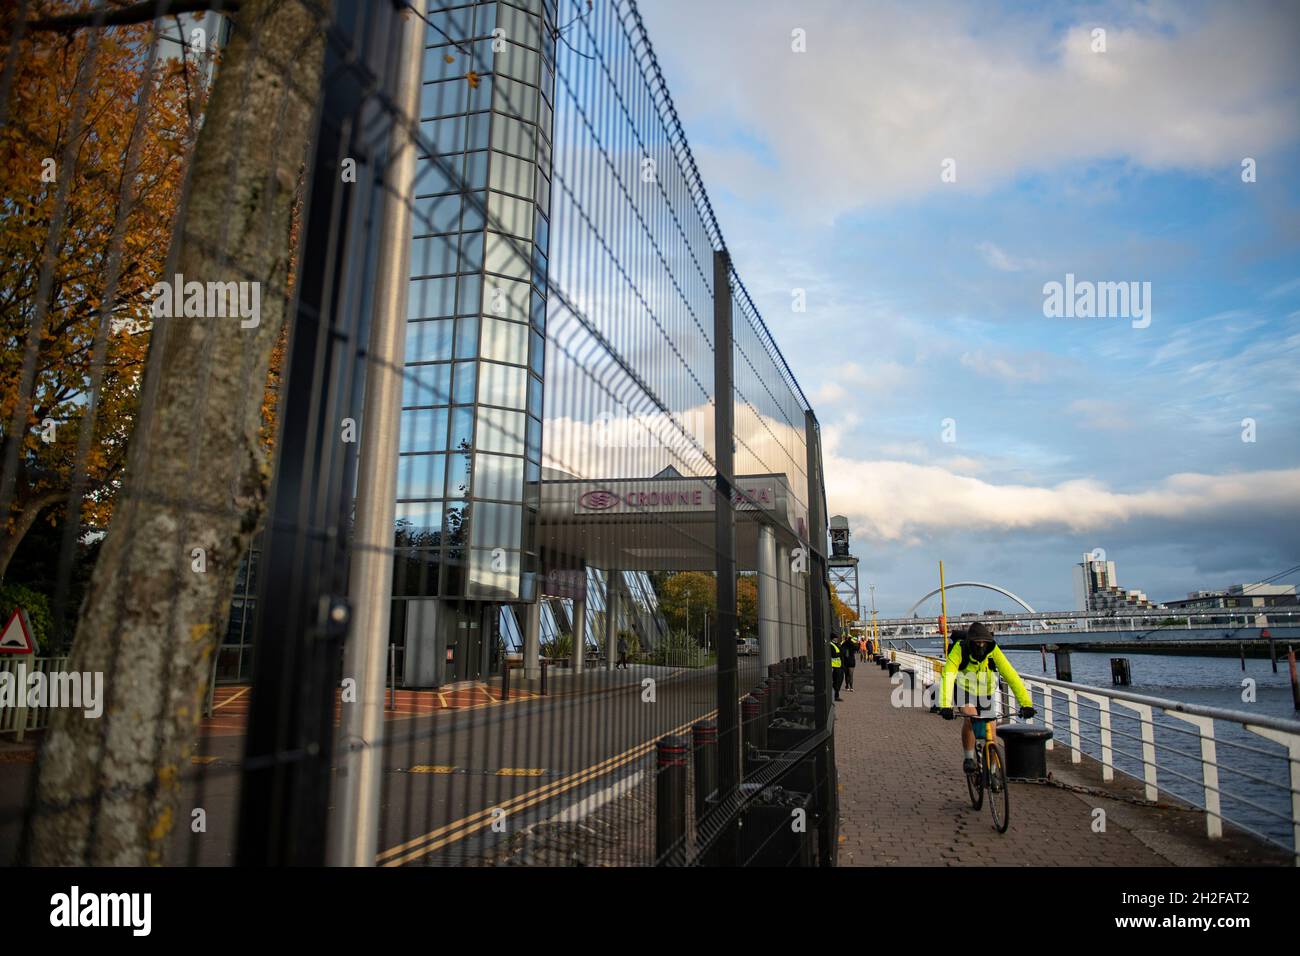 Glasgow, Scotland, UK. 21st Oct, 2021. PICTURED: The security perimeter fence to prevent any protestors gaining entry to the COP26 site. 10 days until the start of COP26. The COP26 site showing temporary structures half built on the grounds of the Scottish Event Campus (SEC) Previously known as Scottish Exhibition and Conference Centre (SECC). Security fences with a ‘ring of steel' encapsulates the COP26 conference site. CCTV stations with emergency lights and loudspeakers are positioned all over the site. Credit: Colin Fisher/Alamy Live News Stock Photo